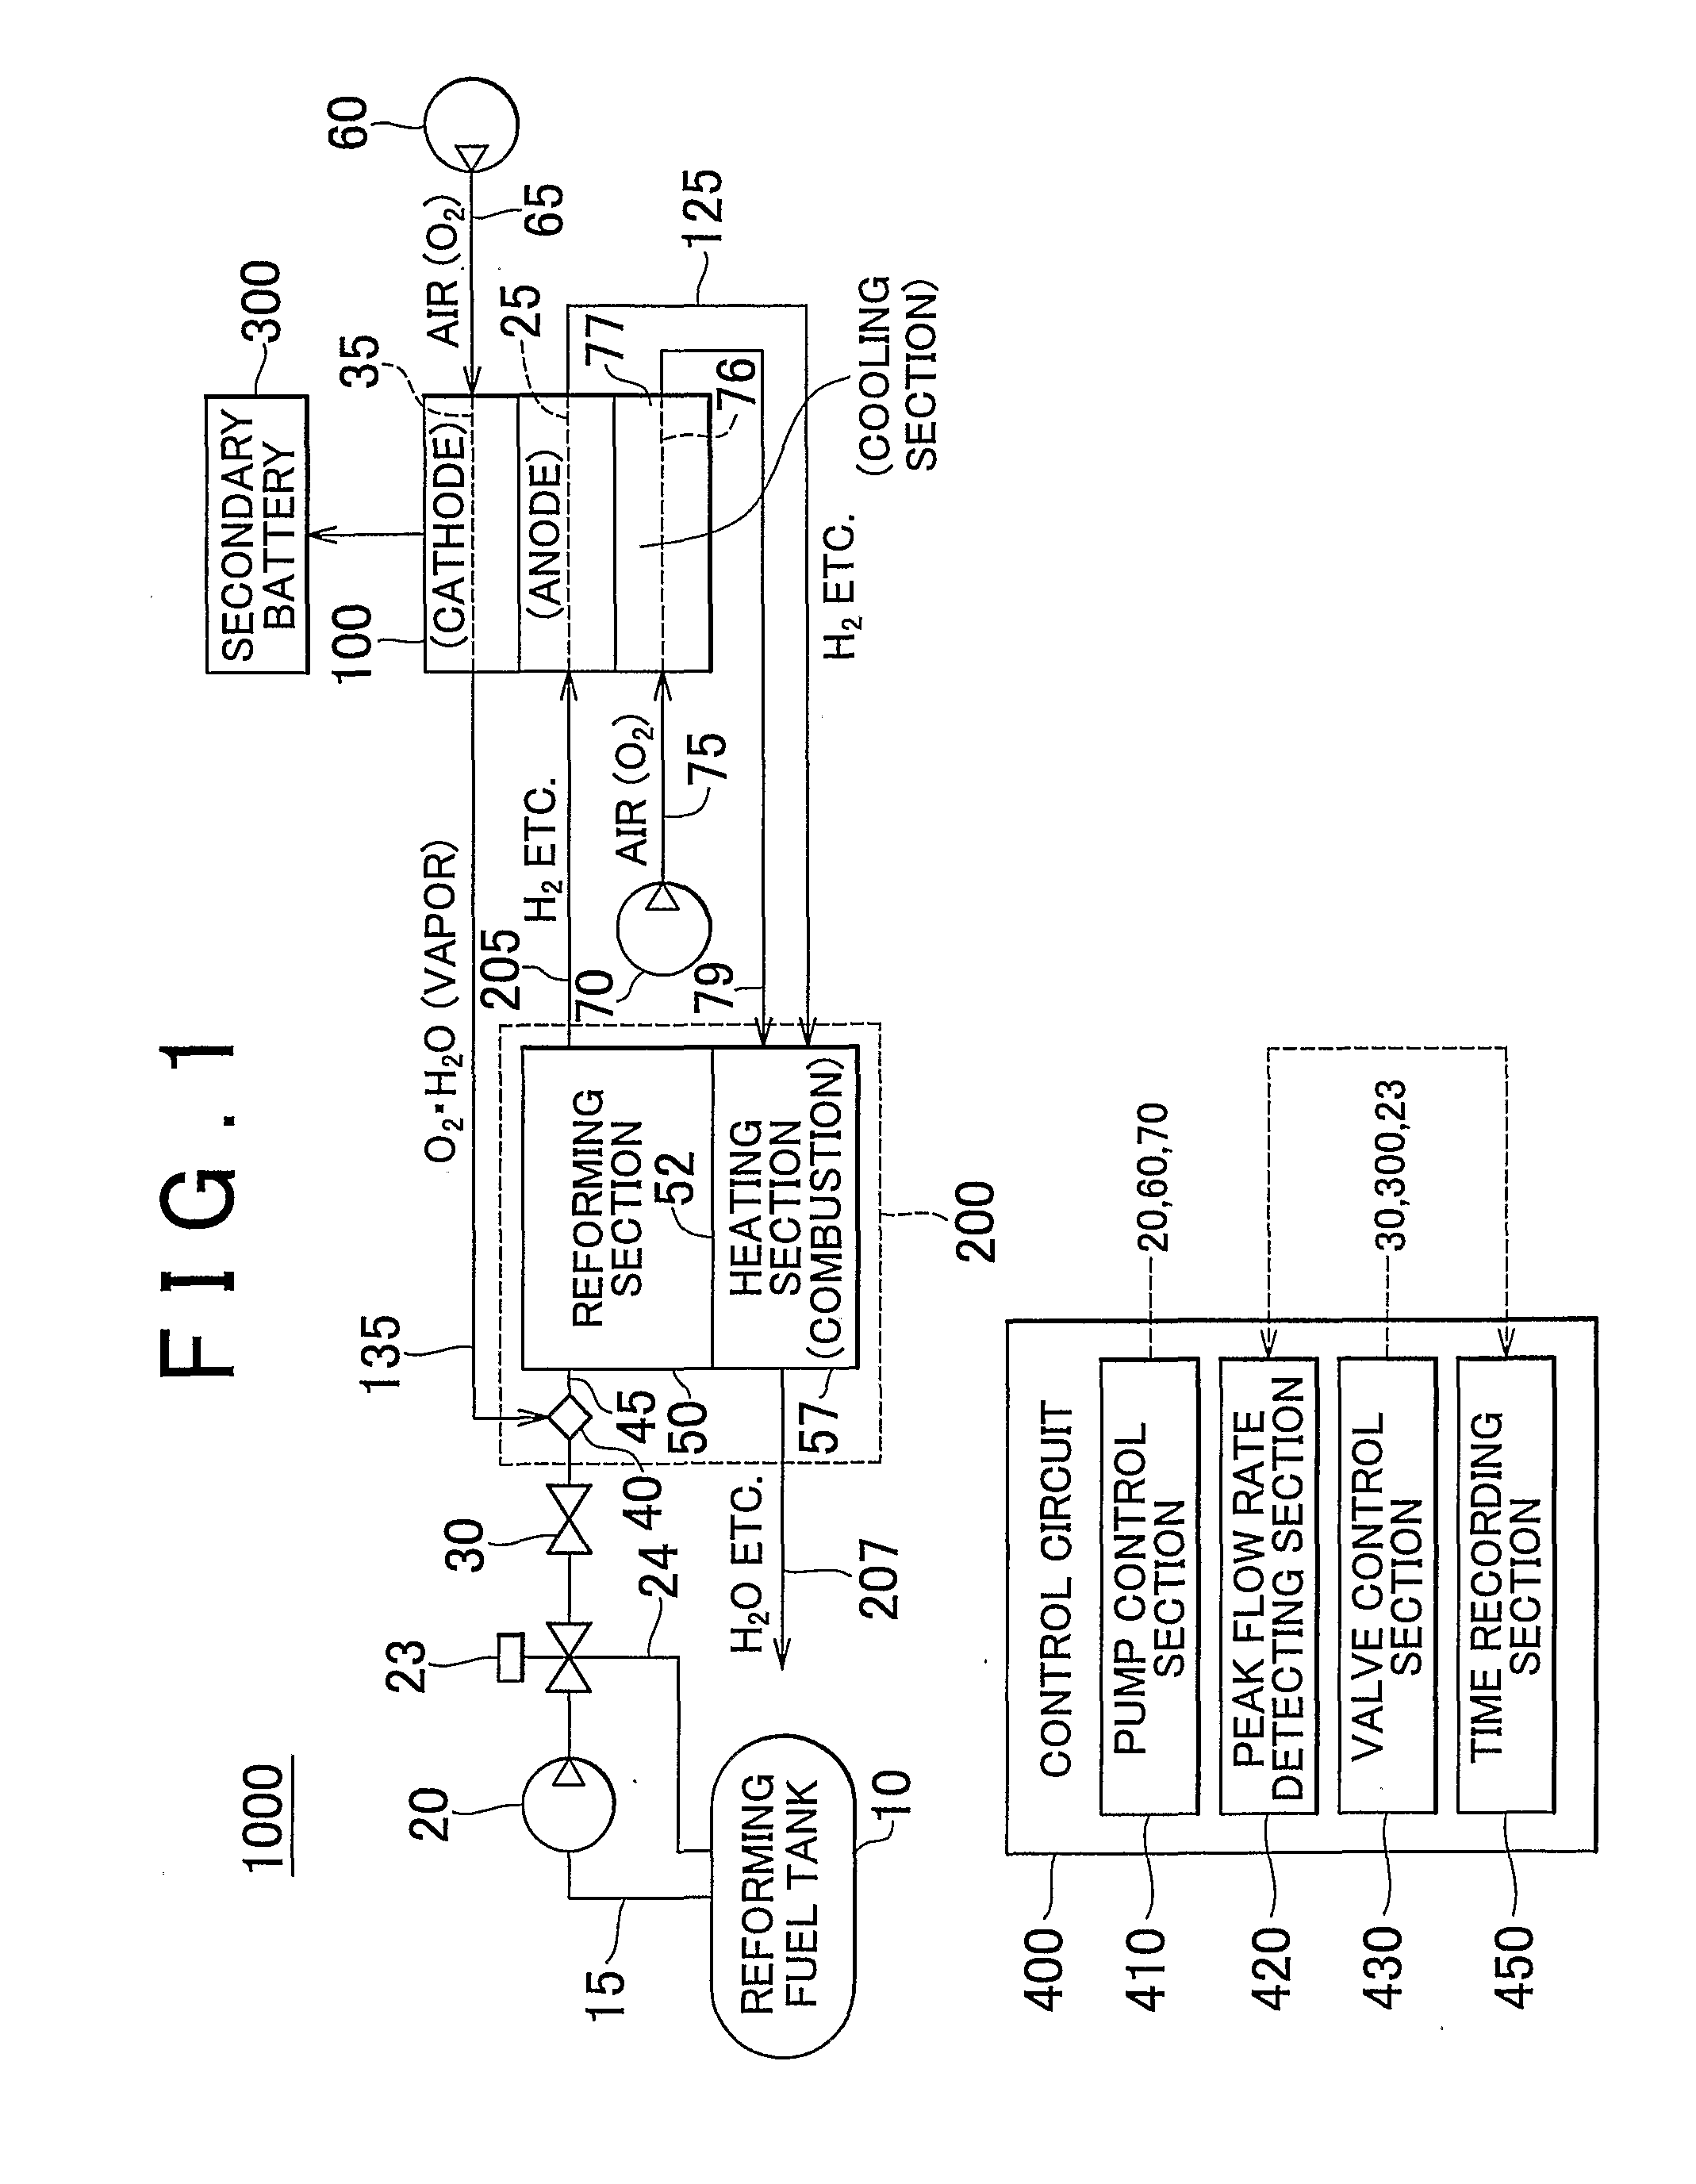 Reforming system and reforming method